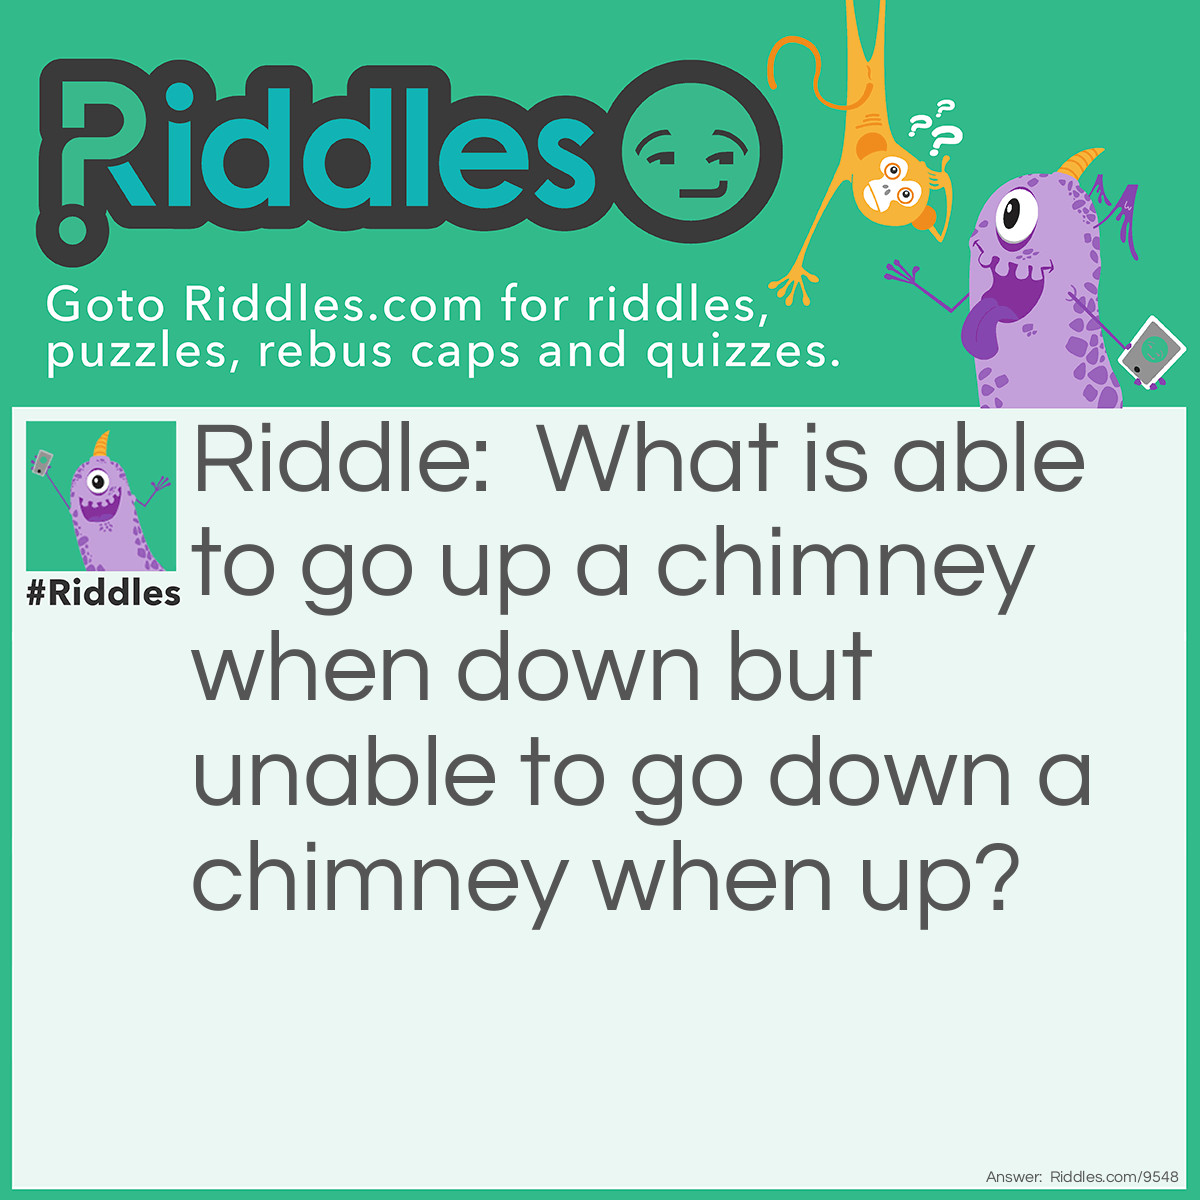 Riddle: What is able to go up a chimney when down but unable to go down a chimney when up? Answer: An umbrella.